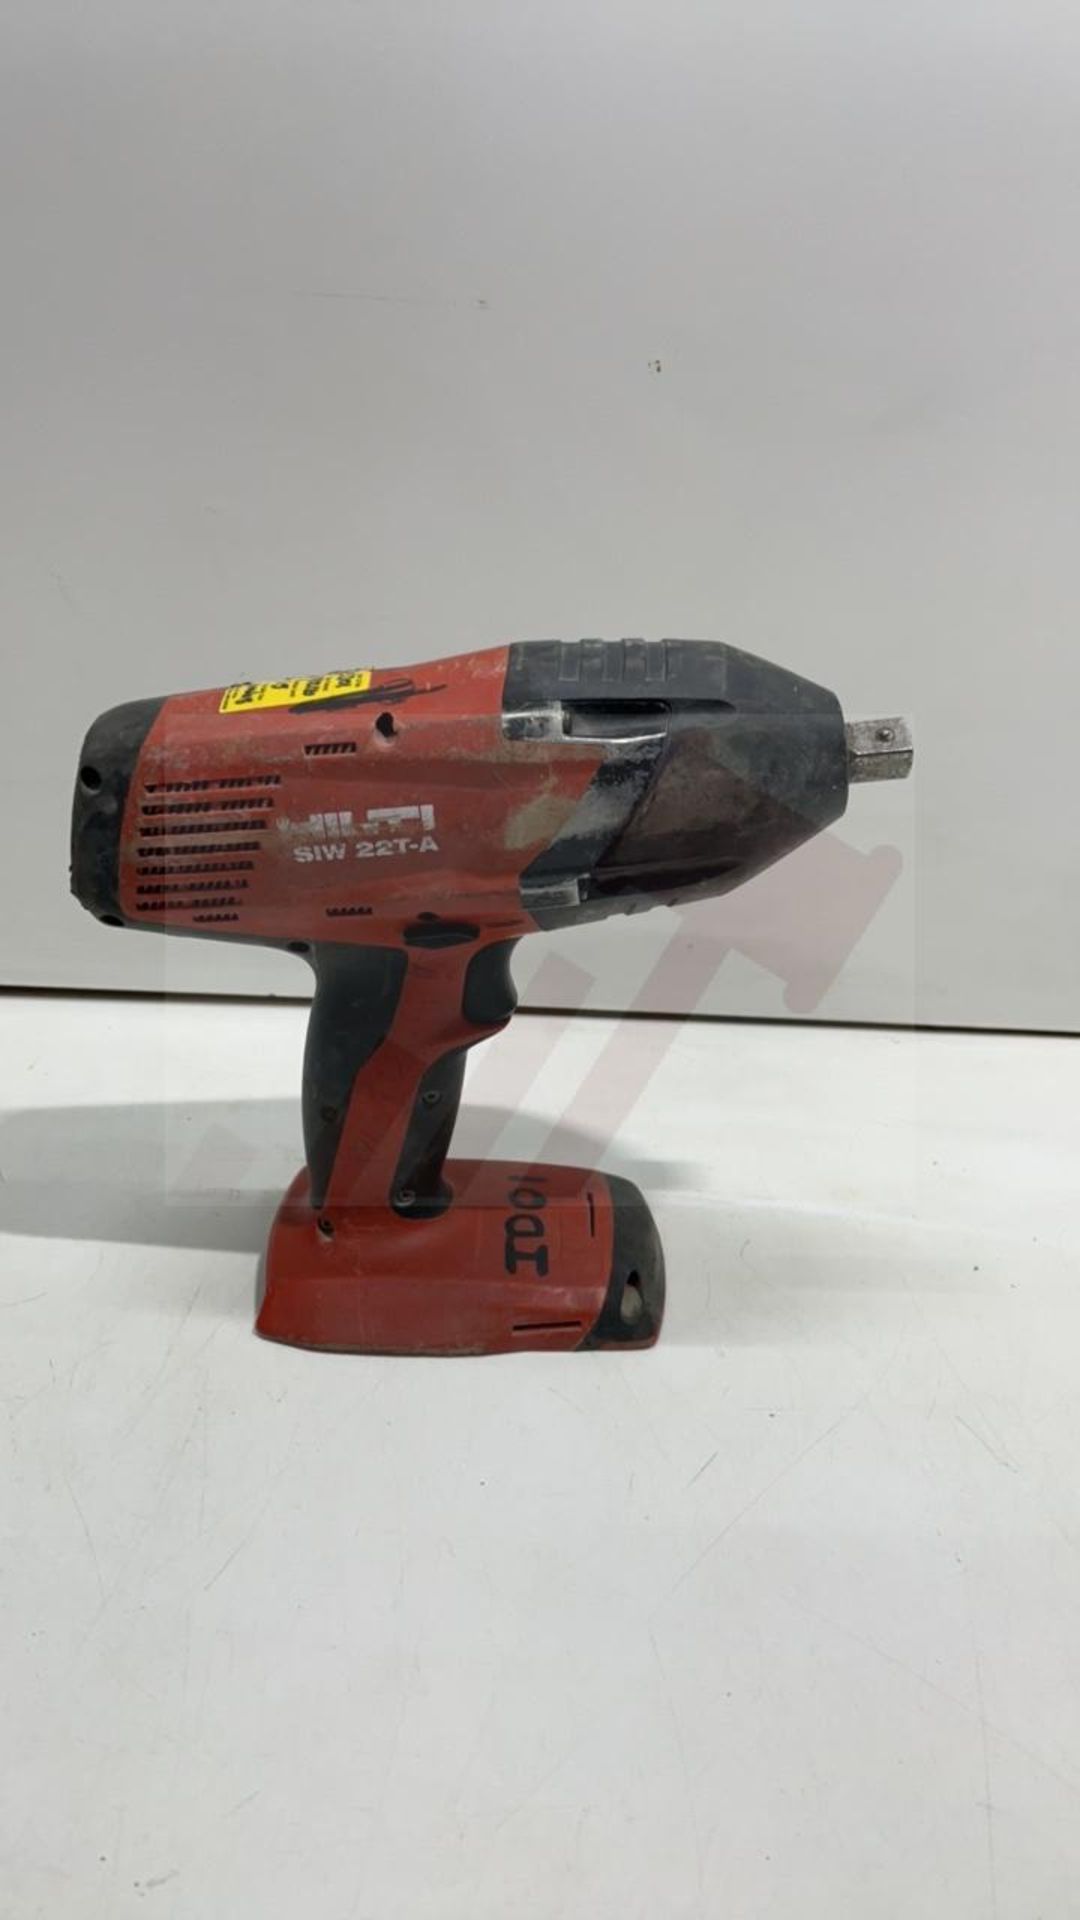 SIW 22T-A 1/2" CORDLESS IMPACT WRENCH